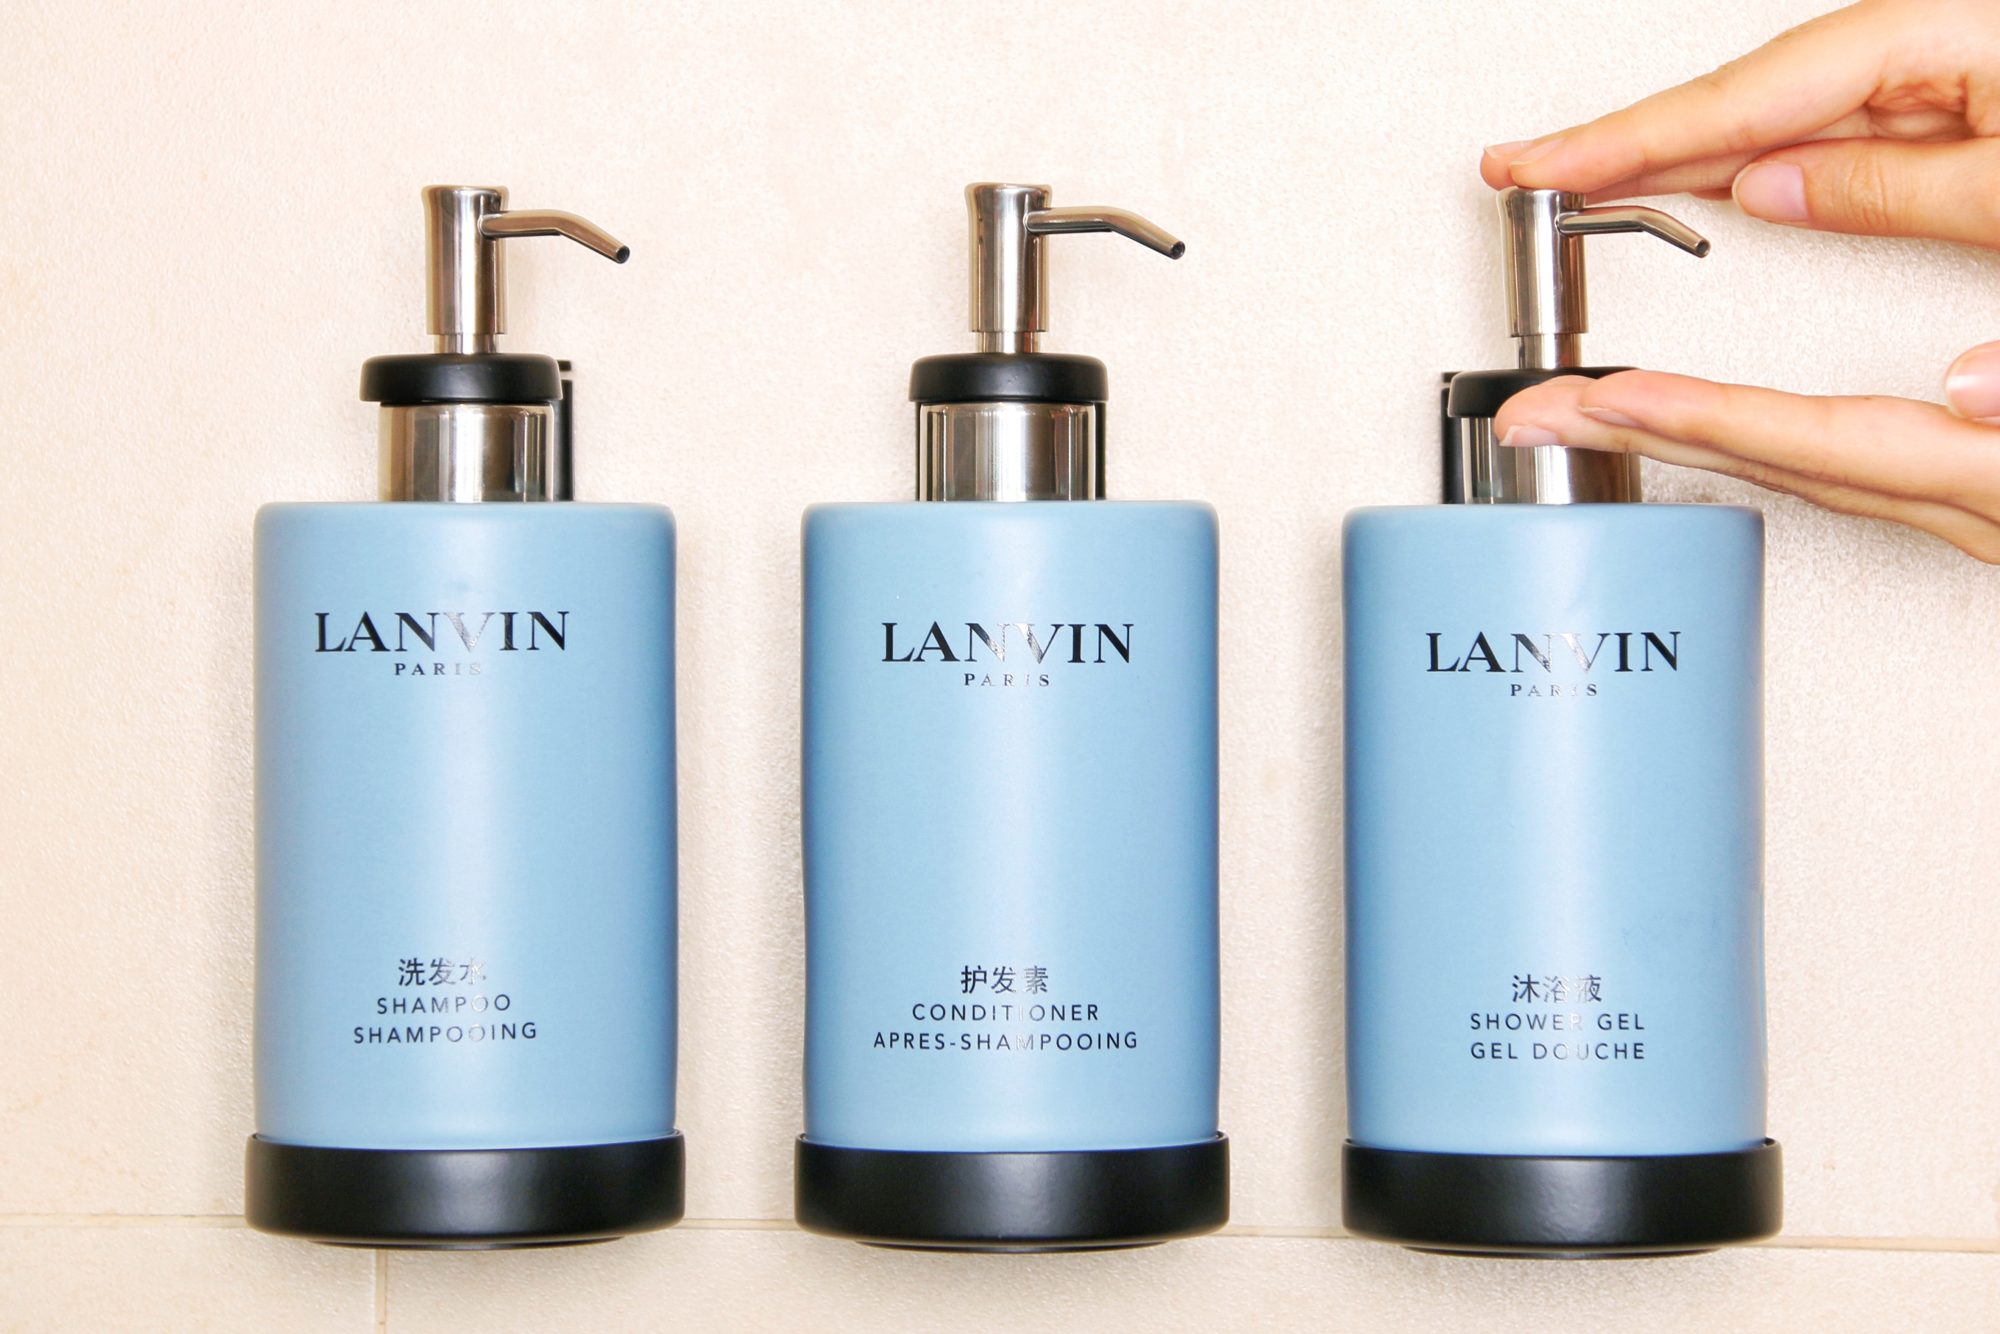 Accor biodegradable solution at Sofitel luxury hotels with Lanvin